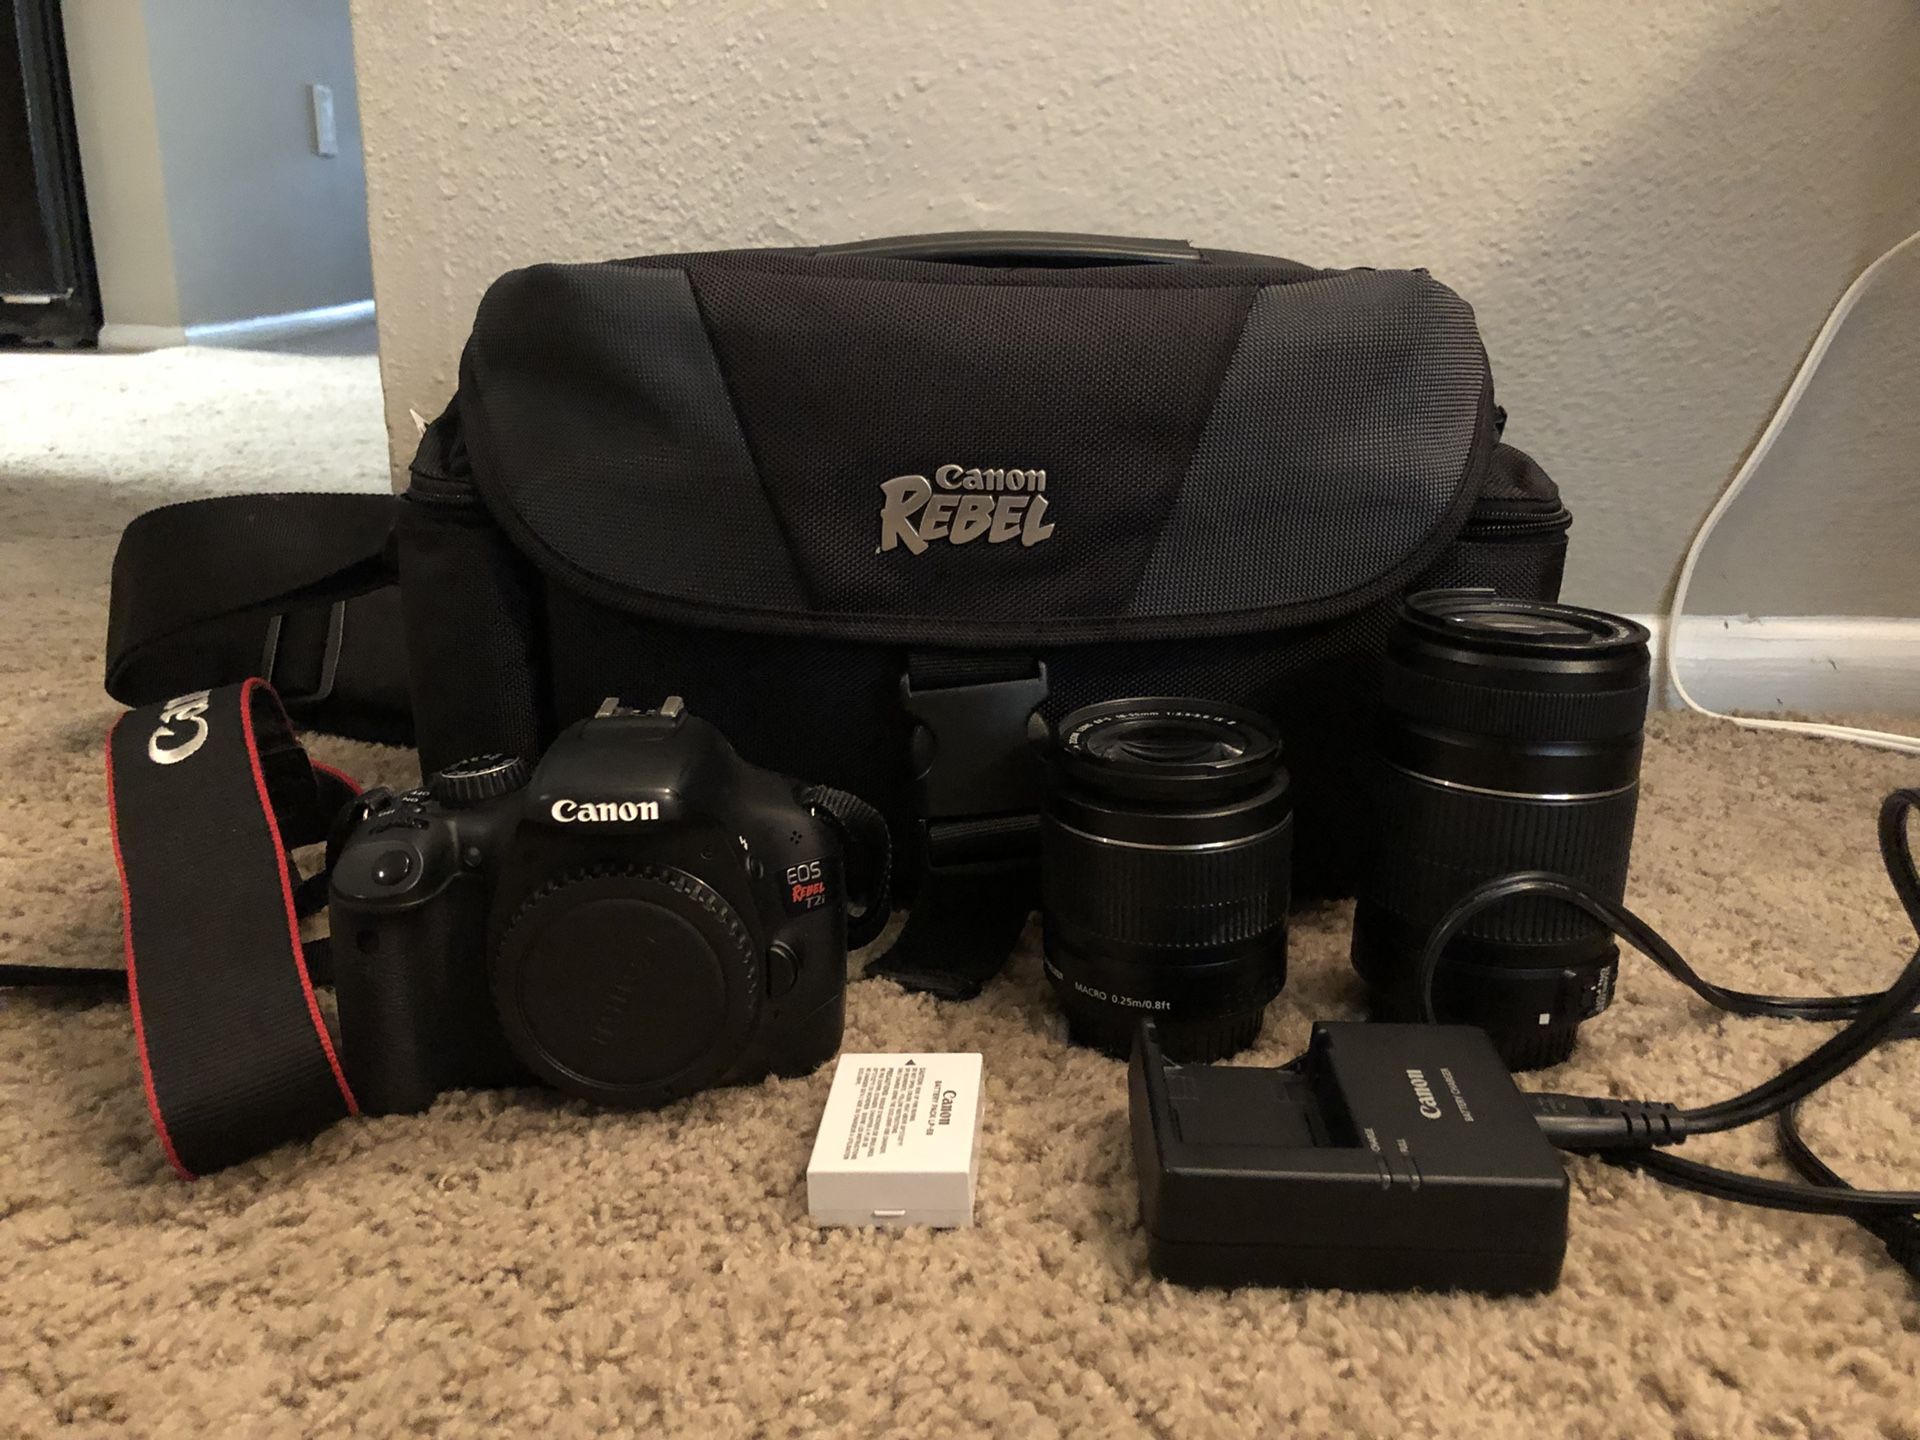 Canon T2i with two lenses (efs 18-55mm and efs 55-250mm), bag, charger, and battery